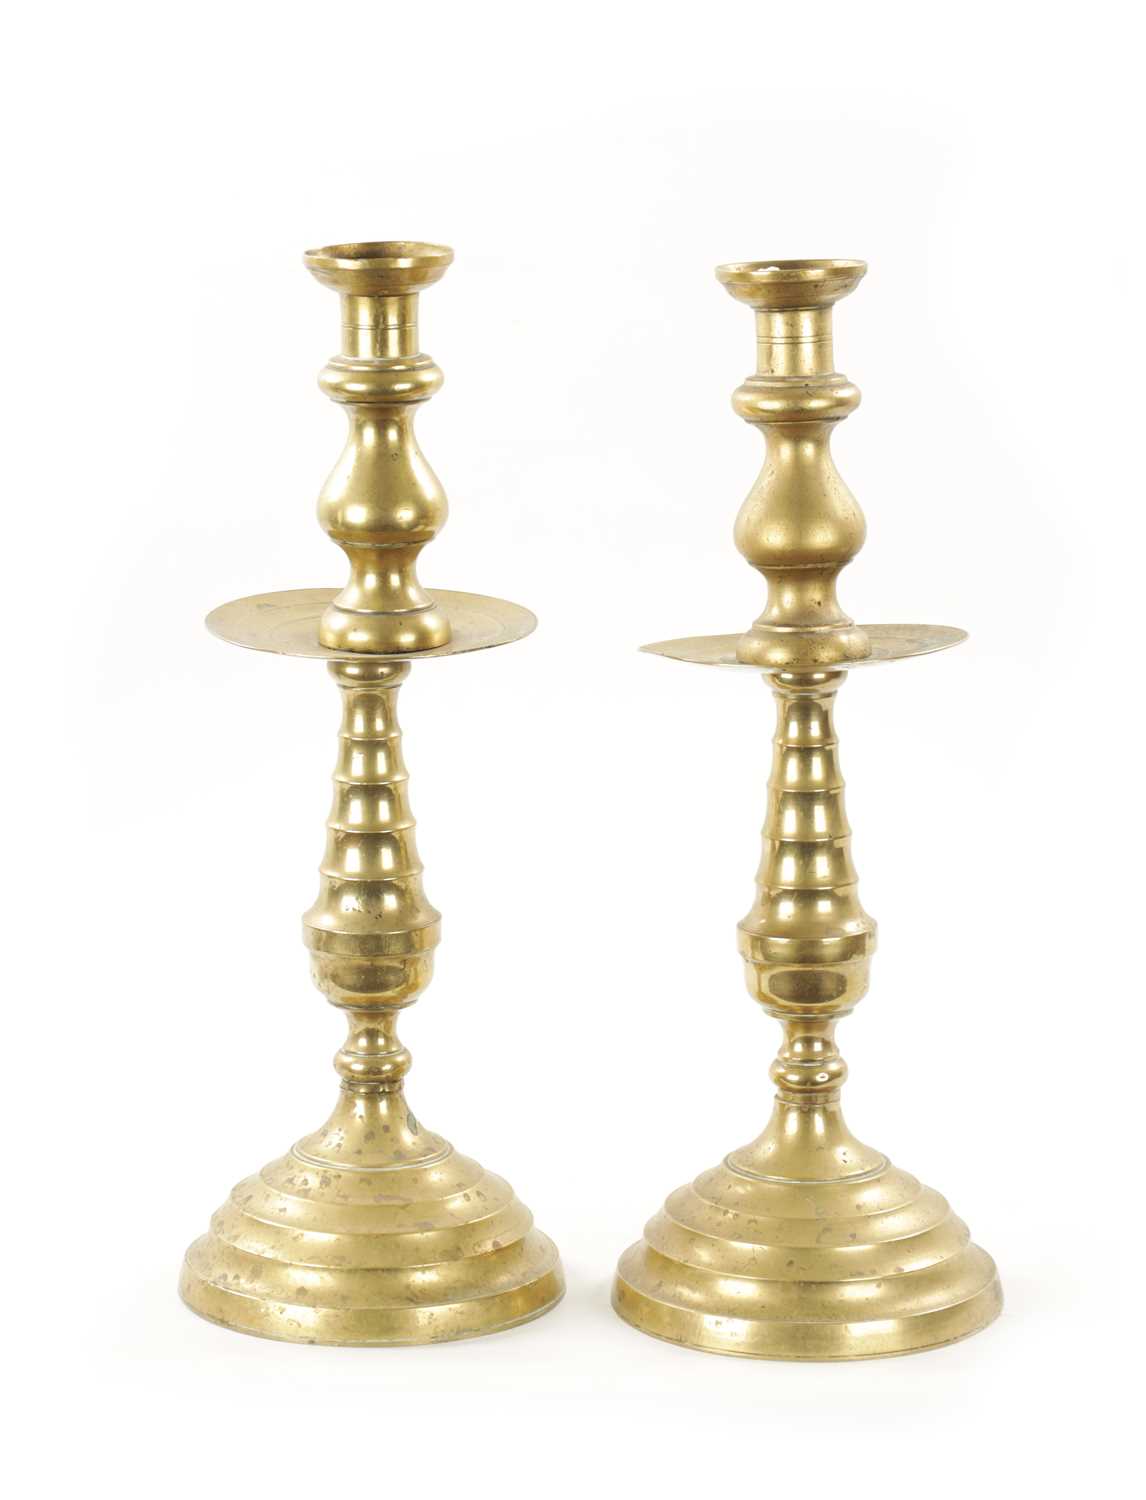 A LARGE PAIR OF 18TH CENTURY BRASS CANDLESTICKS